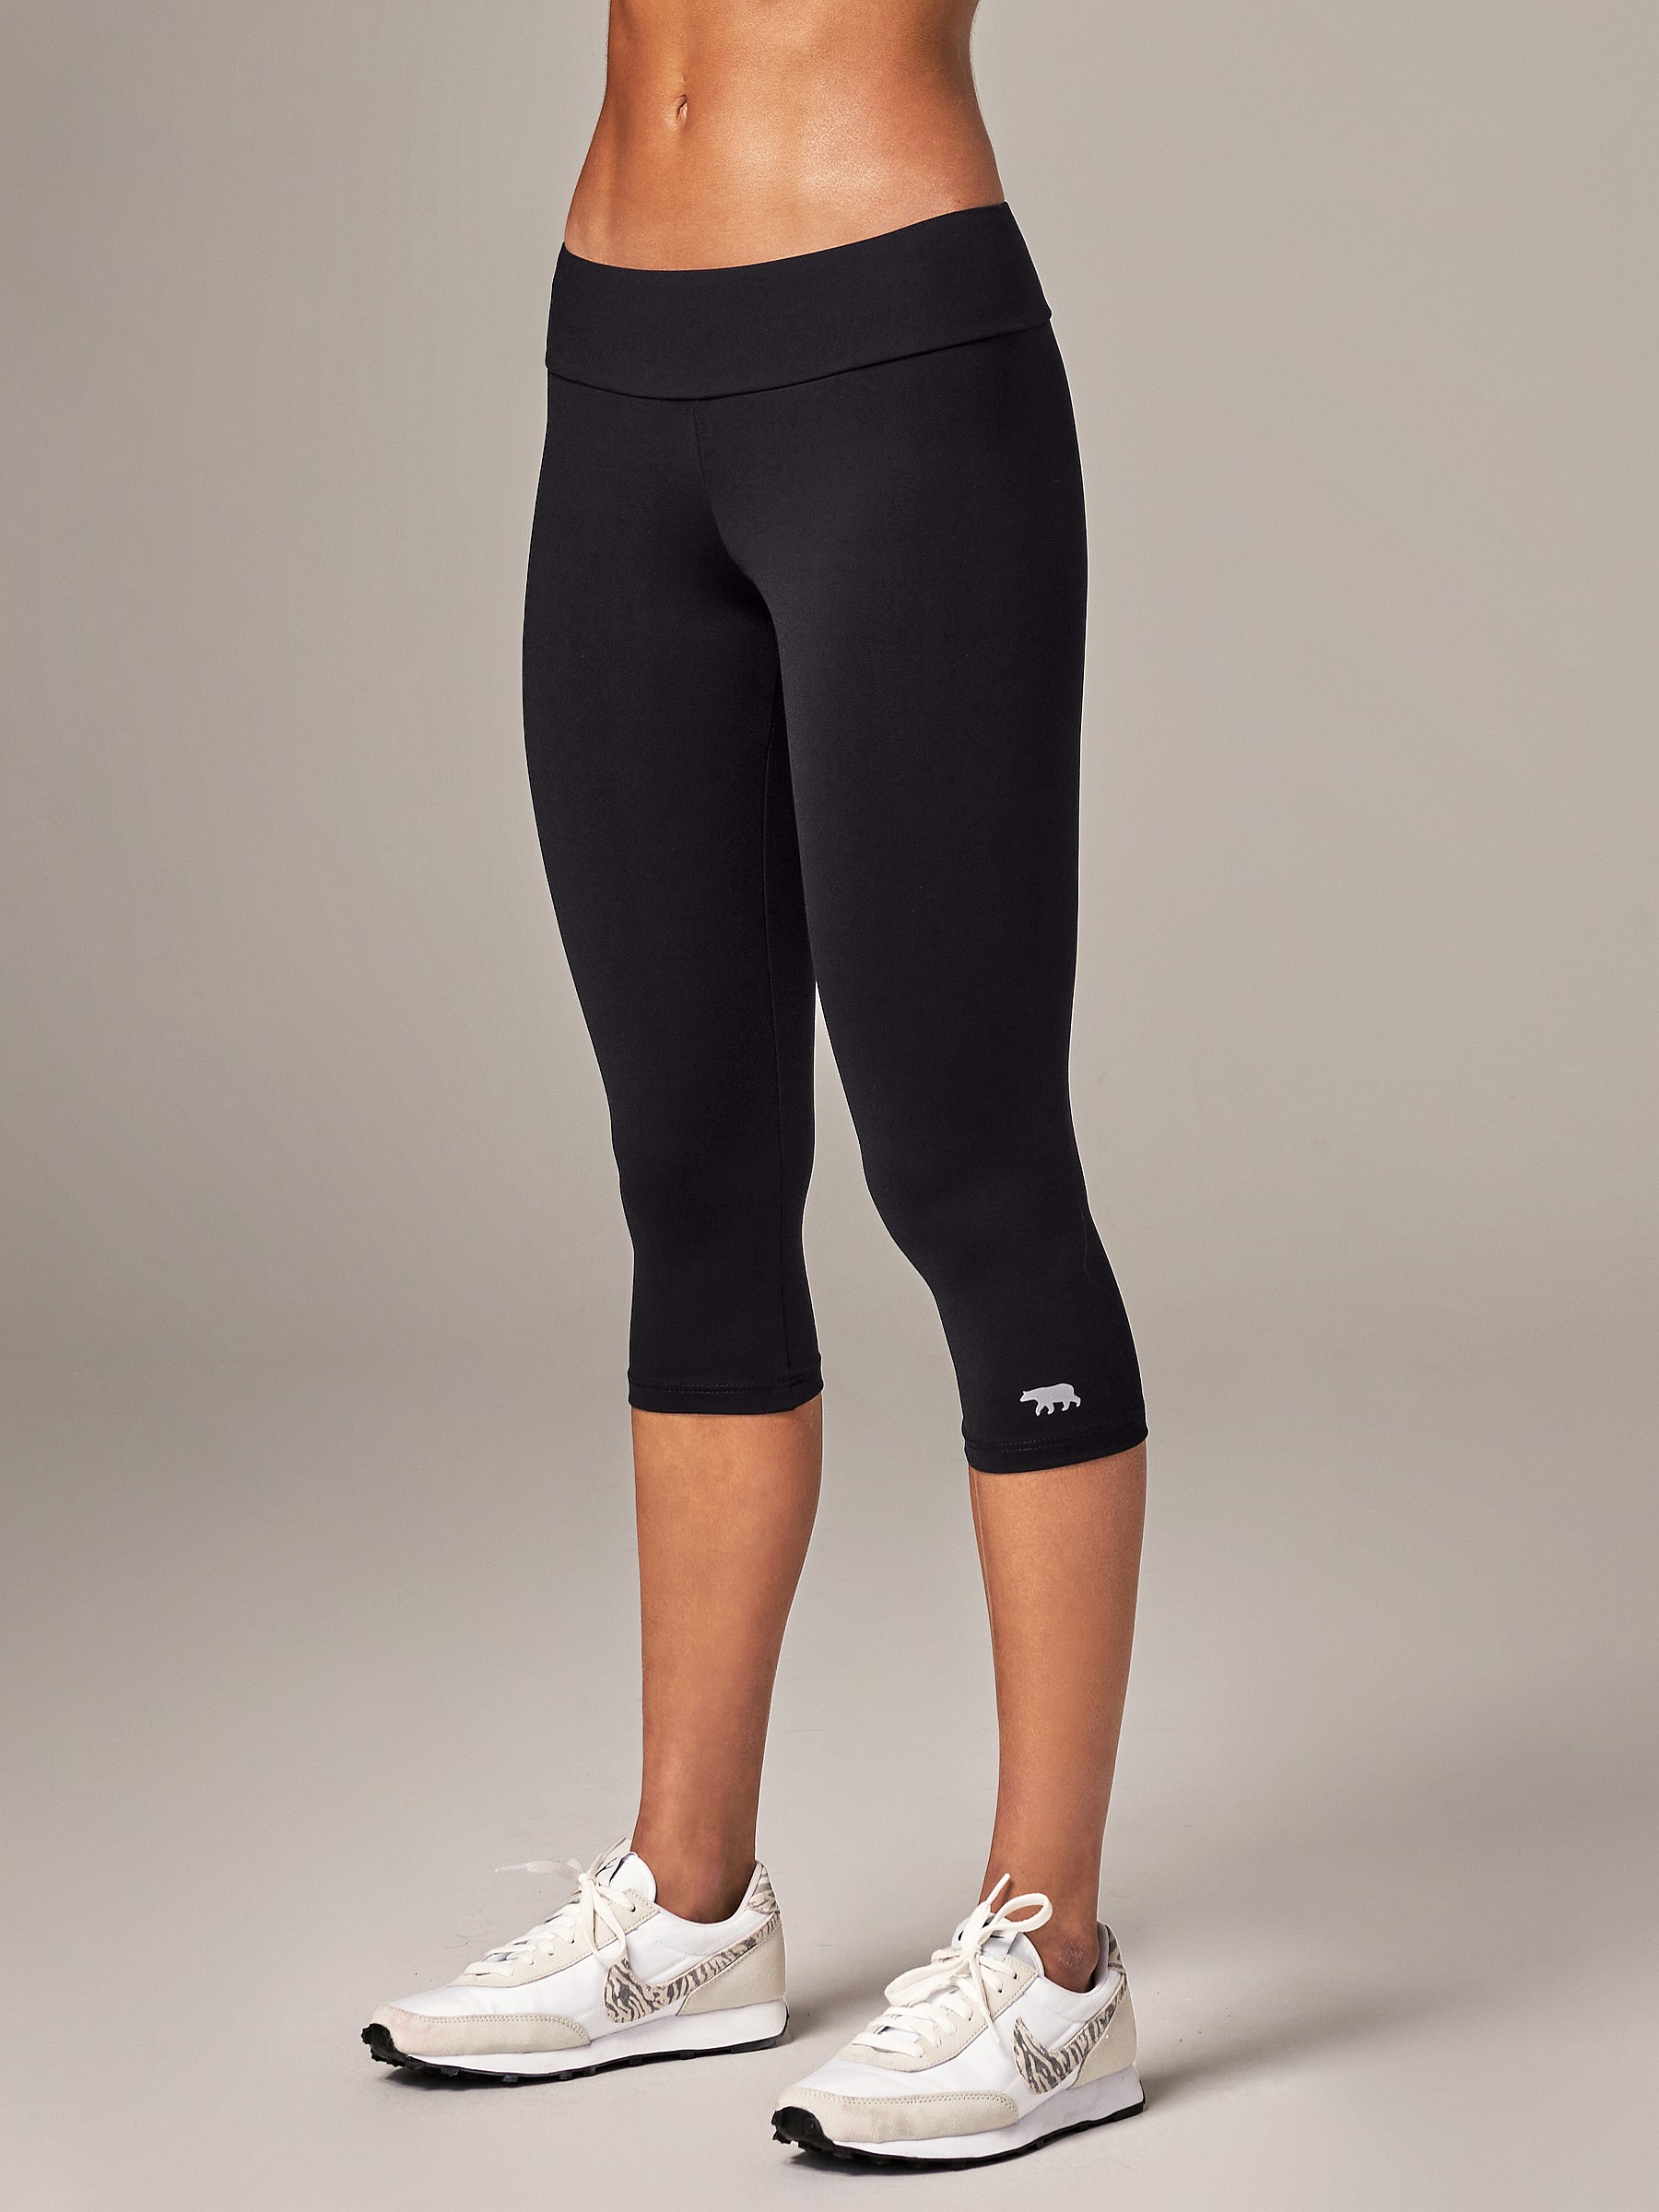 Womens Black High-Rise 3/4 Tights. Running Bare Activewear.